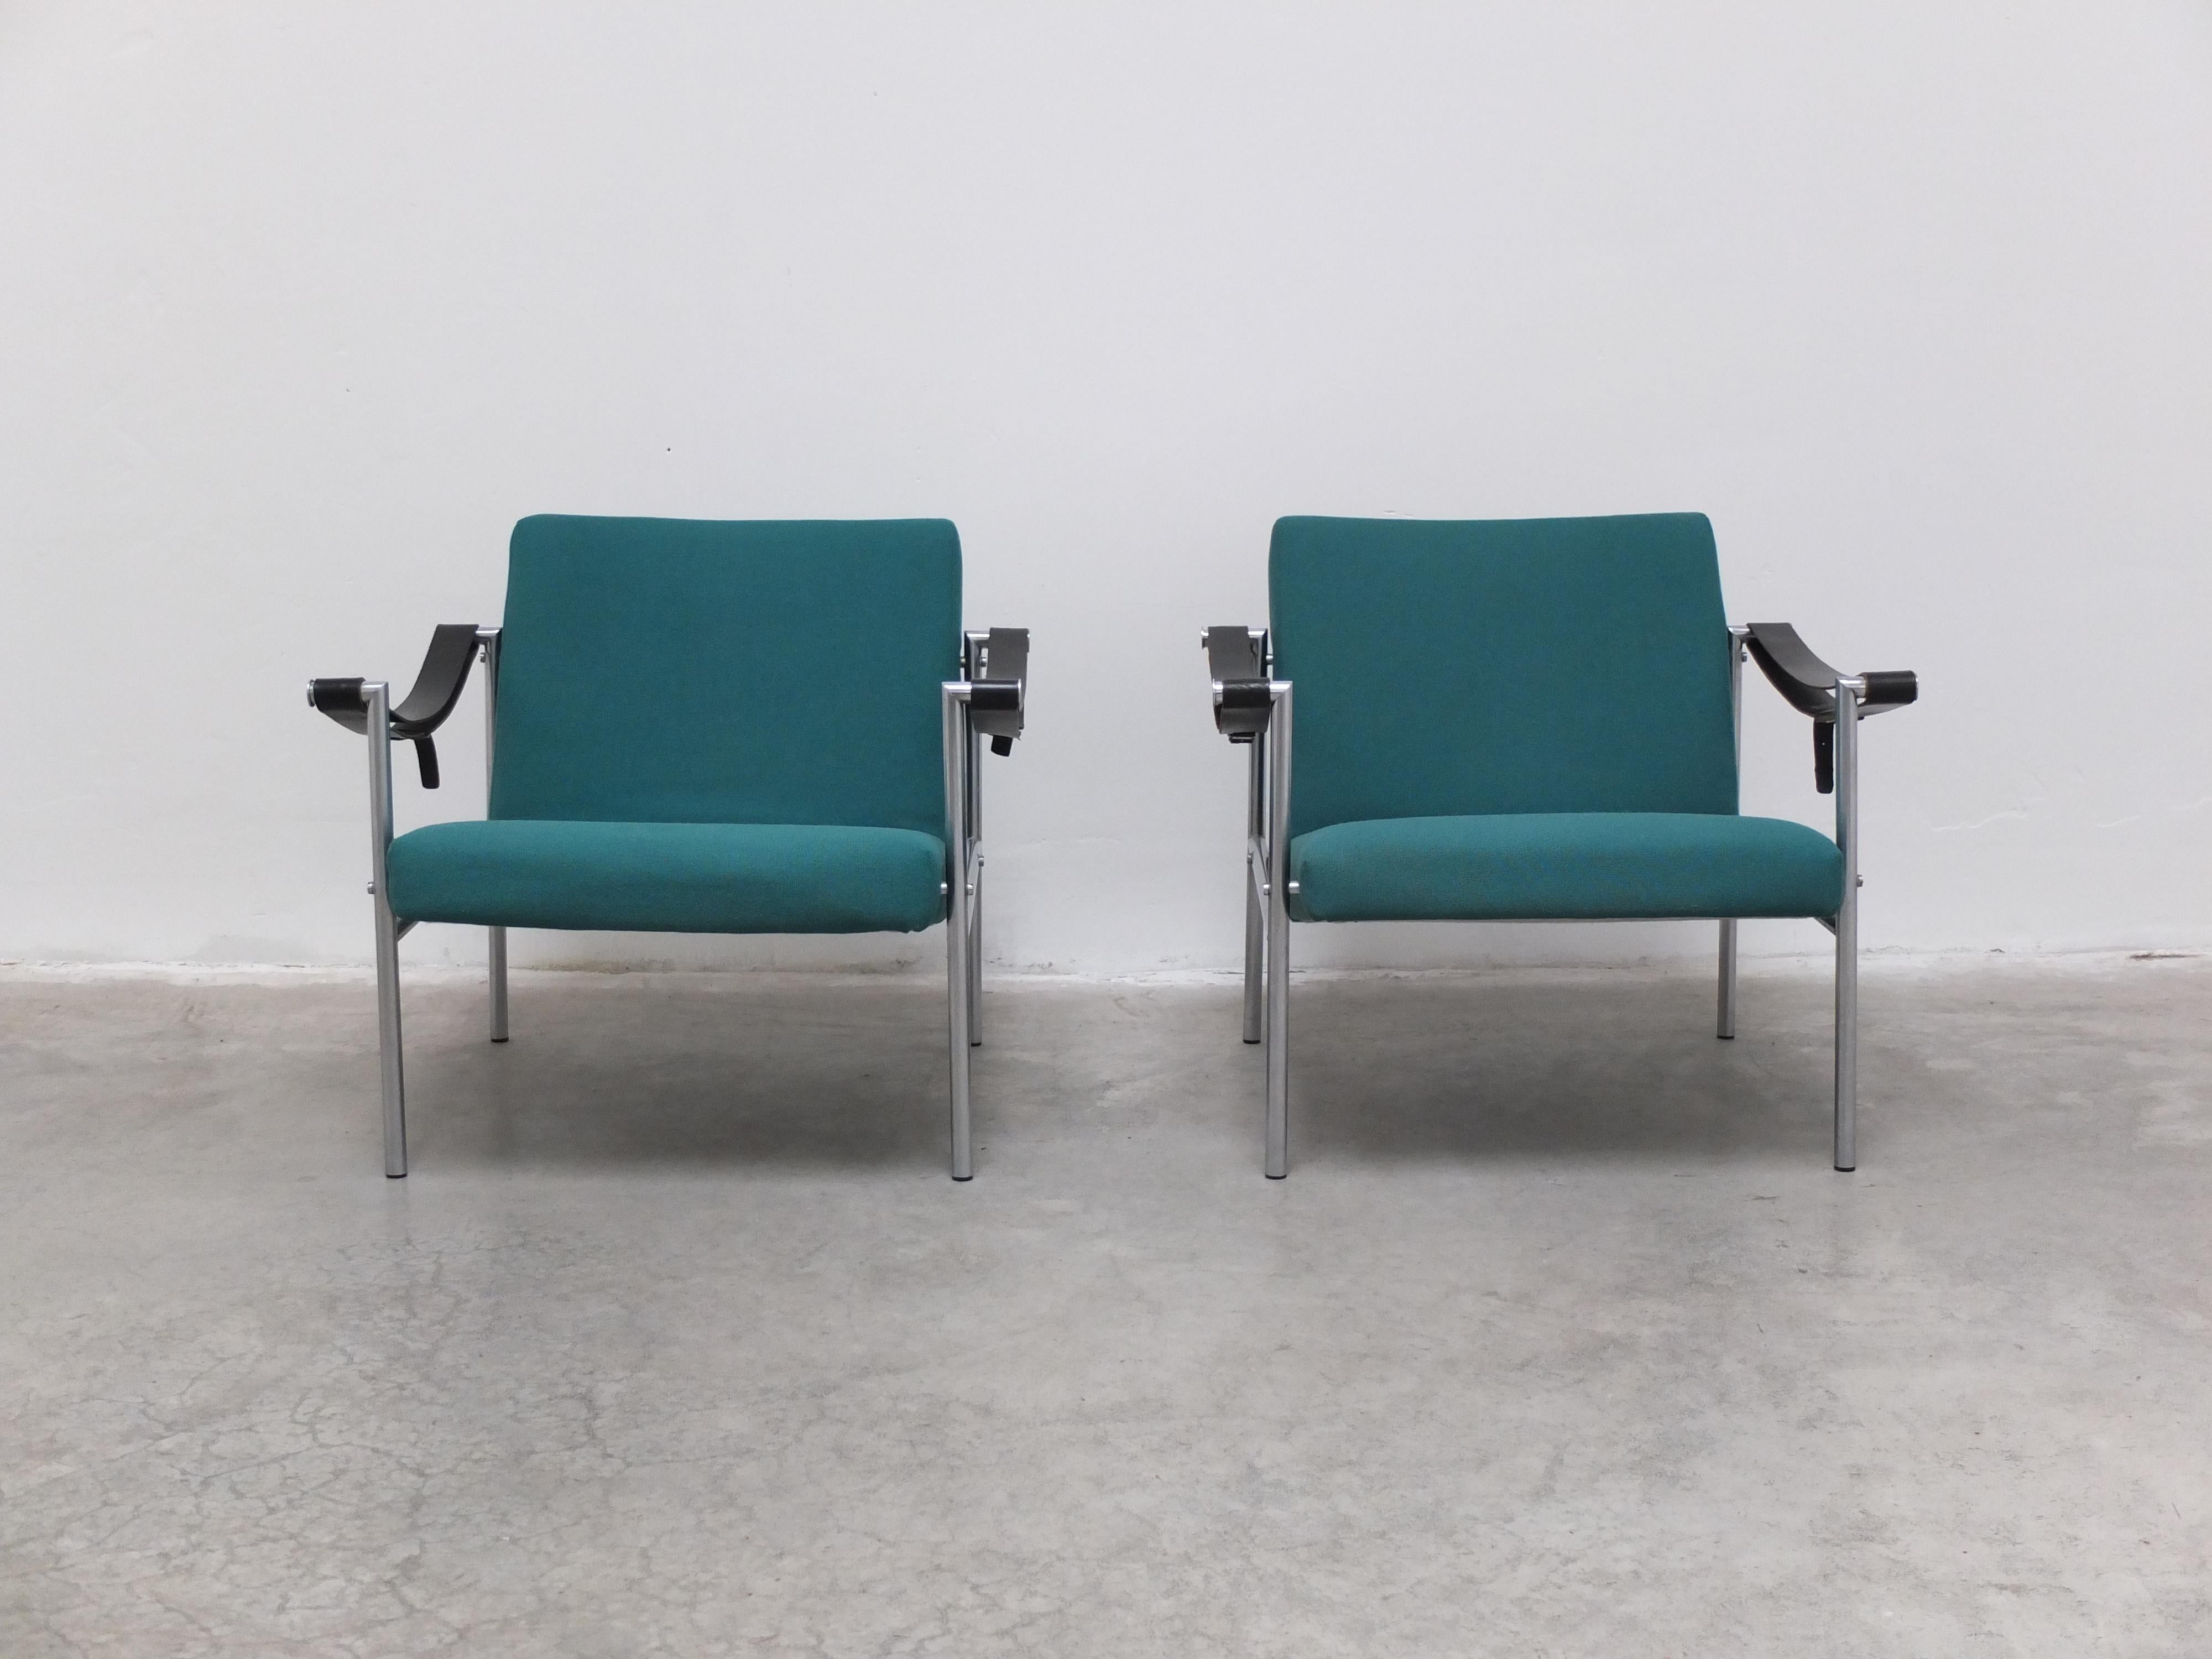 Beautiful pair of model ‘SZ08’ lounge chairs designed by Martin Visser in collaboration with Dick Van Der Net for ‘t Spectrum in 1960. This model is only produced for a couple of years in the 1960s and is therefor much harder to find than for